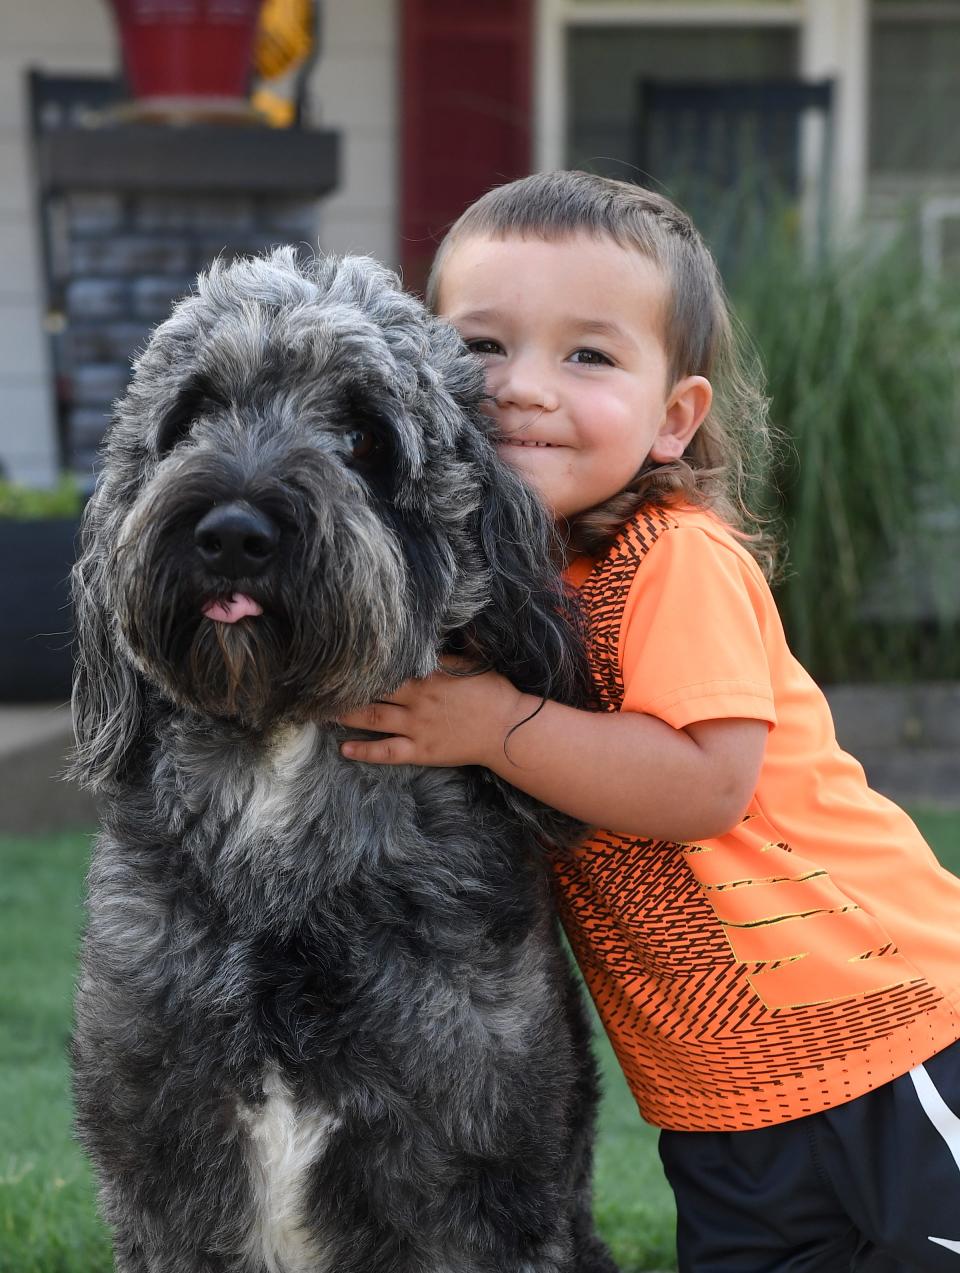 "Harley", a Labradoodle mix breed, gets a hug from Hudson Shrum early in the morning. Dogs and people alike, need to stay safe as temperatures bounce around the 100-degree mark.